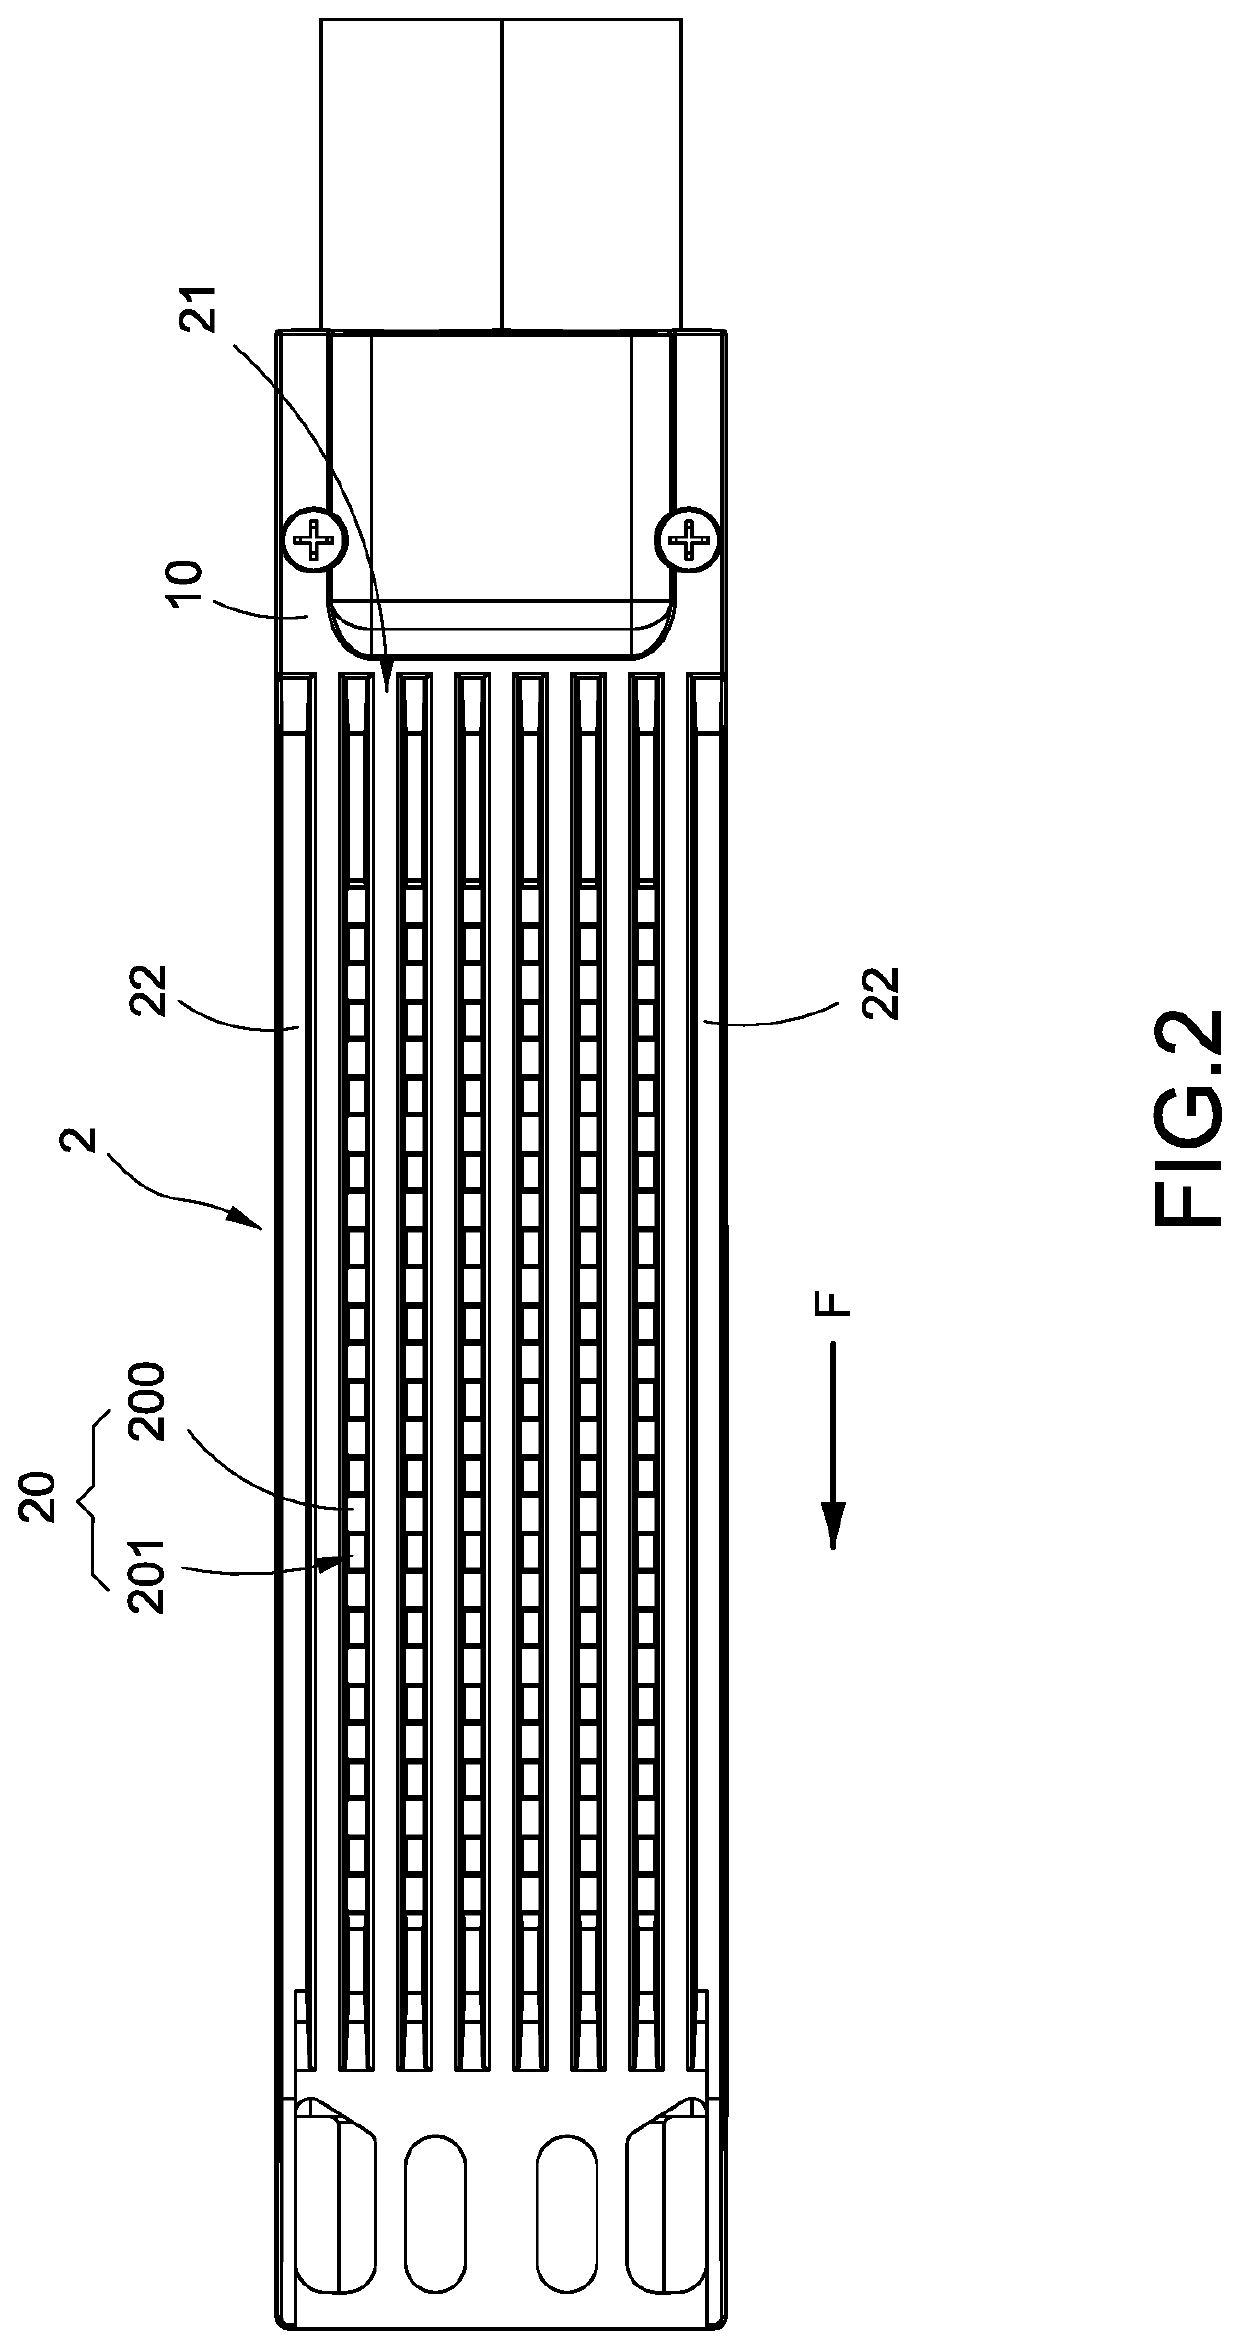 Shell heat dissipating structure of small form-factor pluggable transceiver